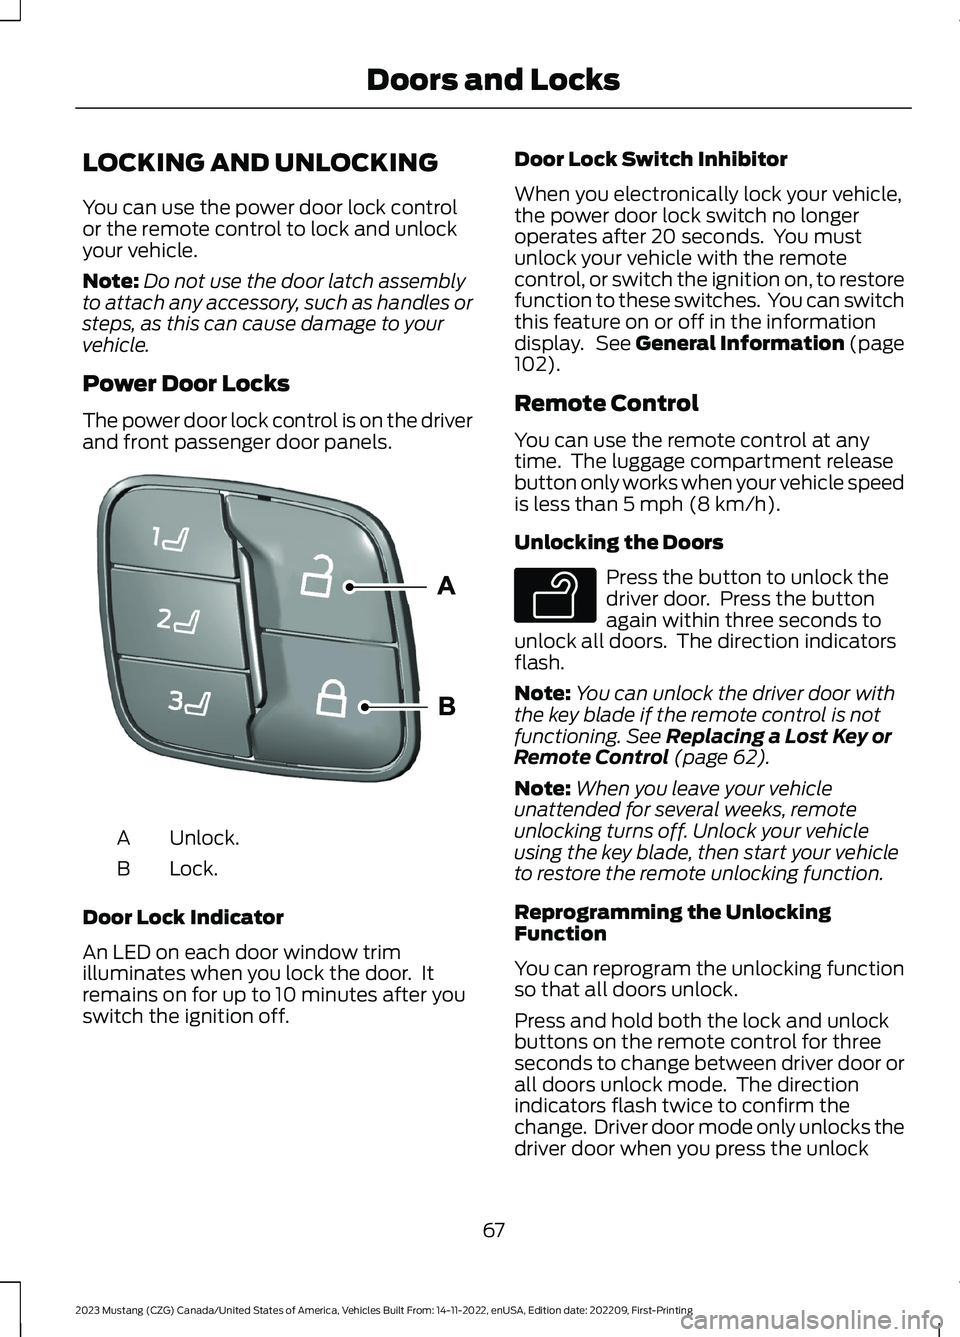 FORD MUSTANG 2023  Owners Manual LOCKING AND UNLOCKING
You can use the power door lock controlor the remote control to lock and unlockyour vehicle.
Note:Do not use the door latch assemblyto attach any accessory, such as handles orste